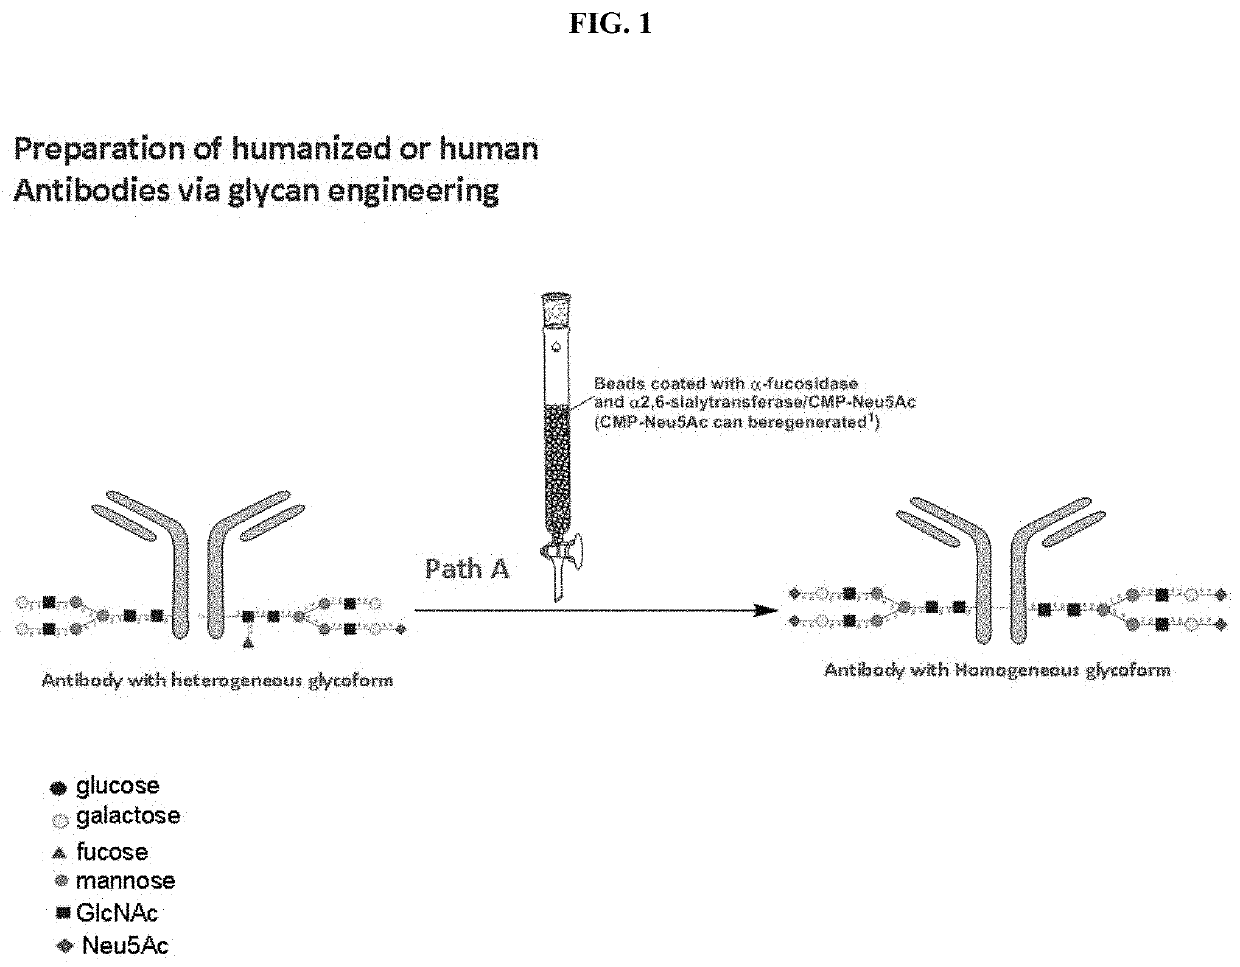 Methods for modifying human antibodies by glycan engineering